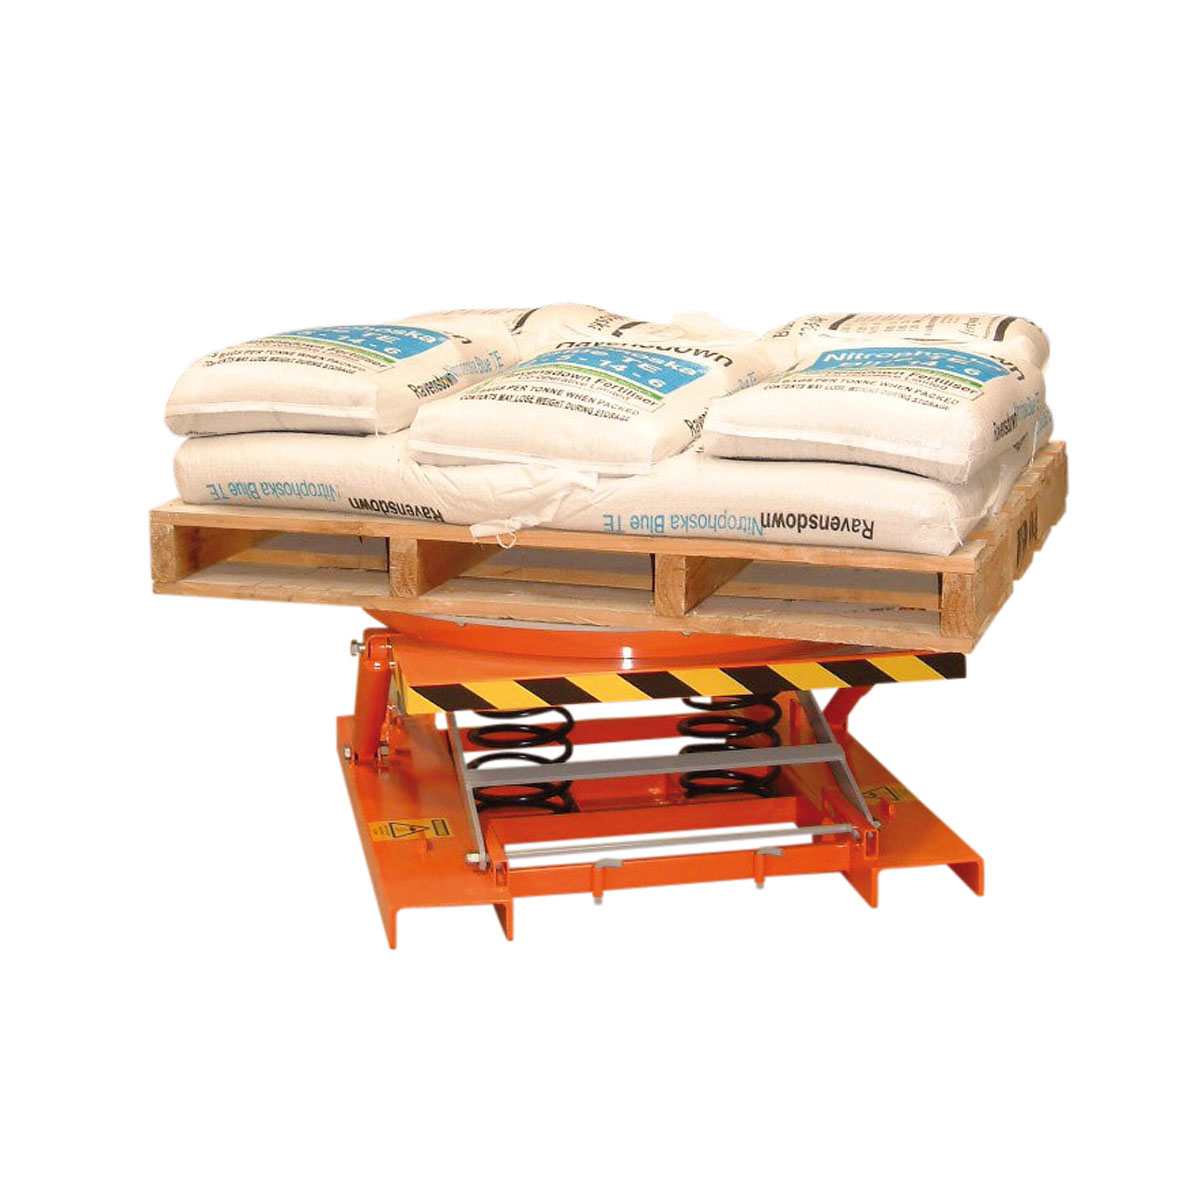 Scissor Lift Table with loaded Goods